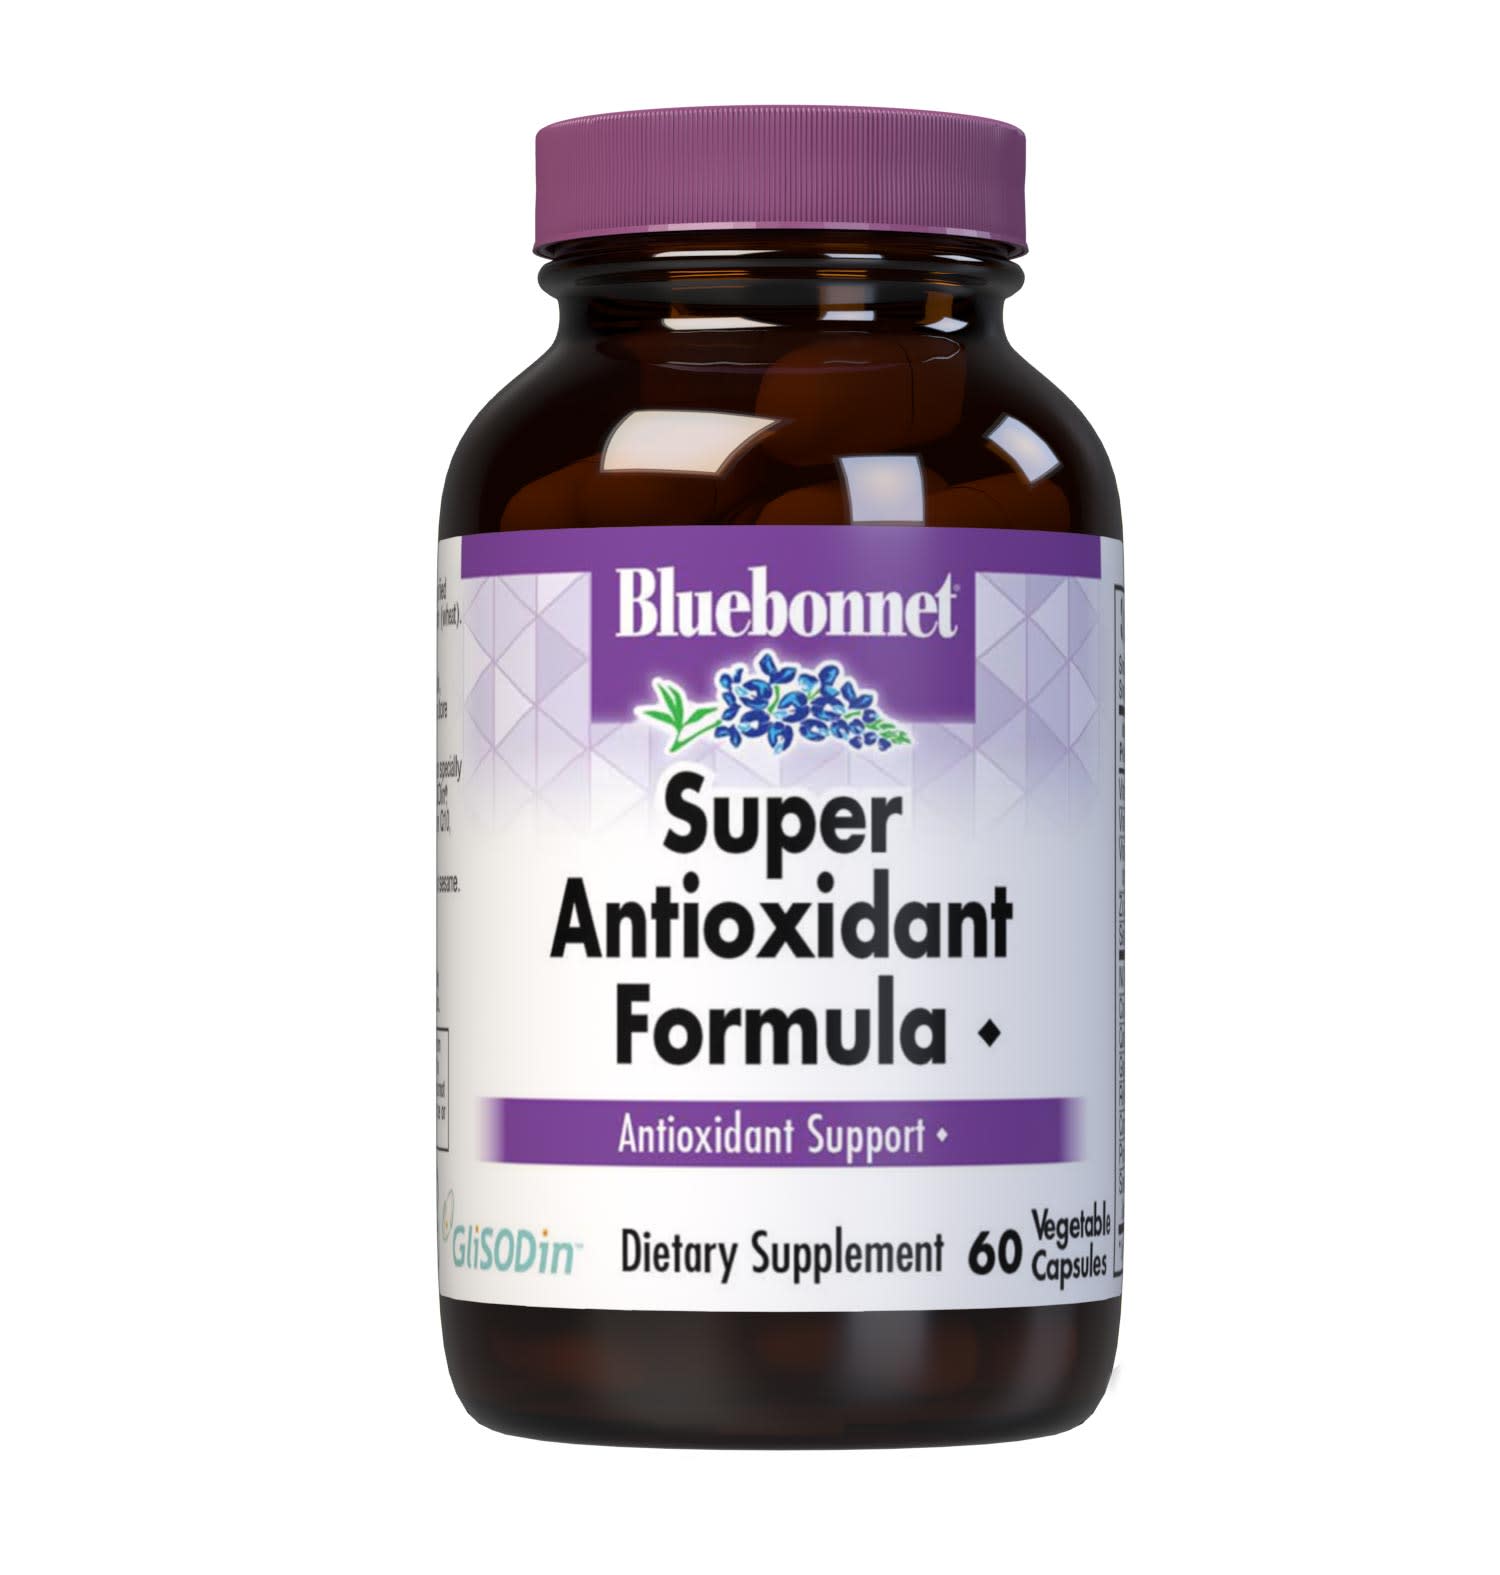 Bluebonnet’s Super Antioxidant Formula 60 Vegetable Capsules are specially formulated with a full range of potent antioxidants, including GliSODin, the first vegetarian form of SOD from cantaloupe melon, and coenzyme Q10, Pycnogenol, red wine polyphenols and N-acetyl-L-cysteine. #size_60 count